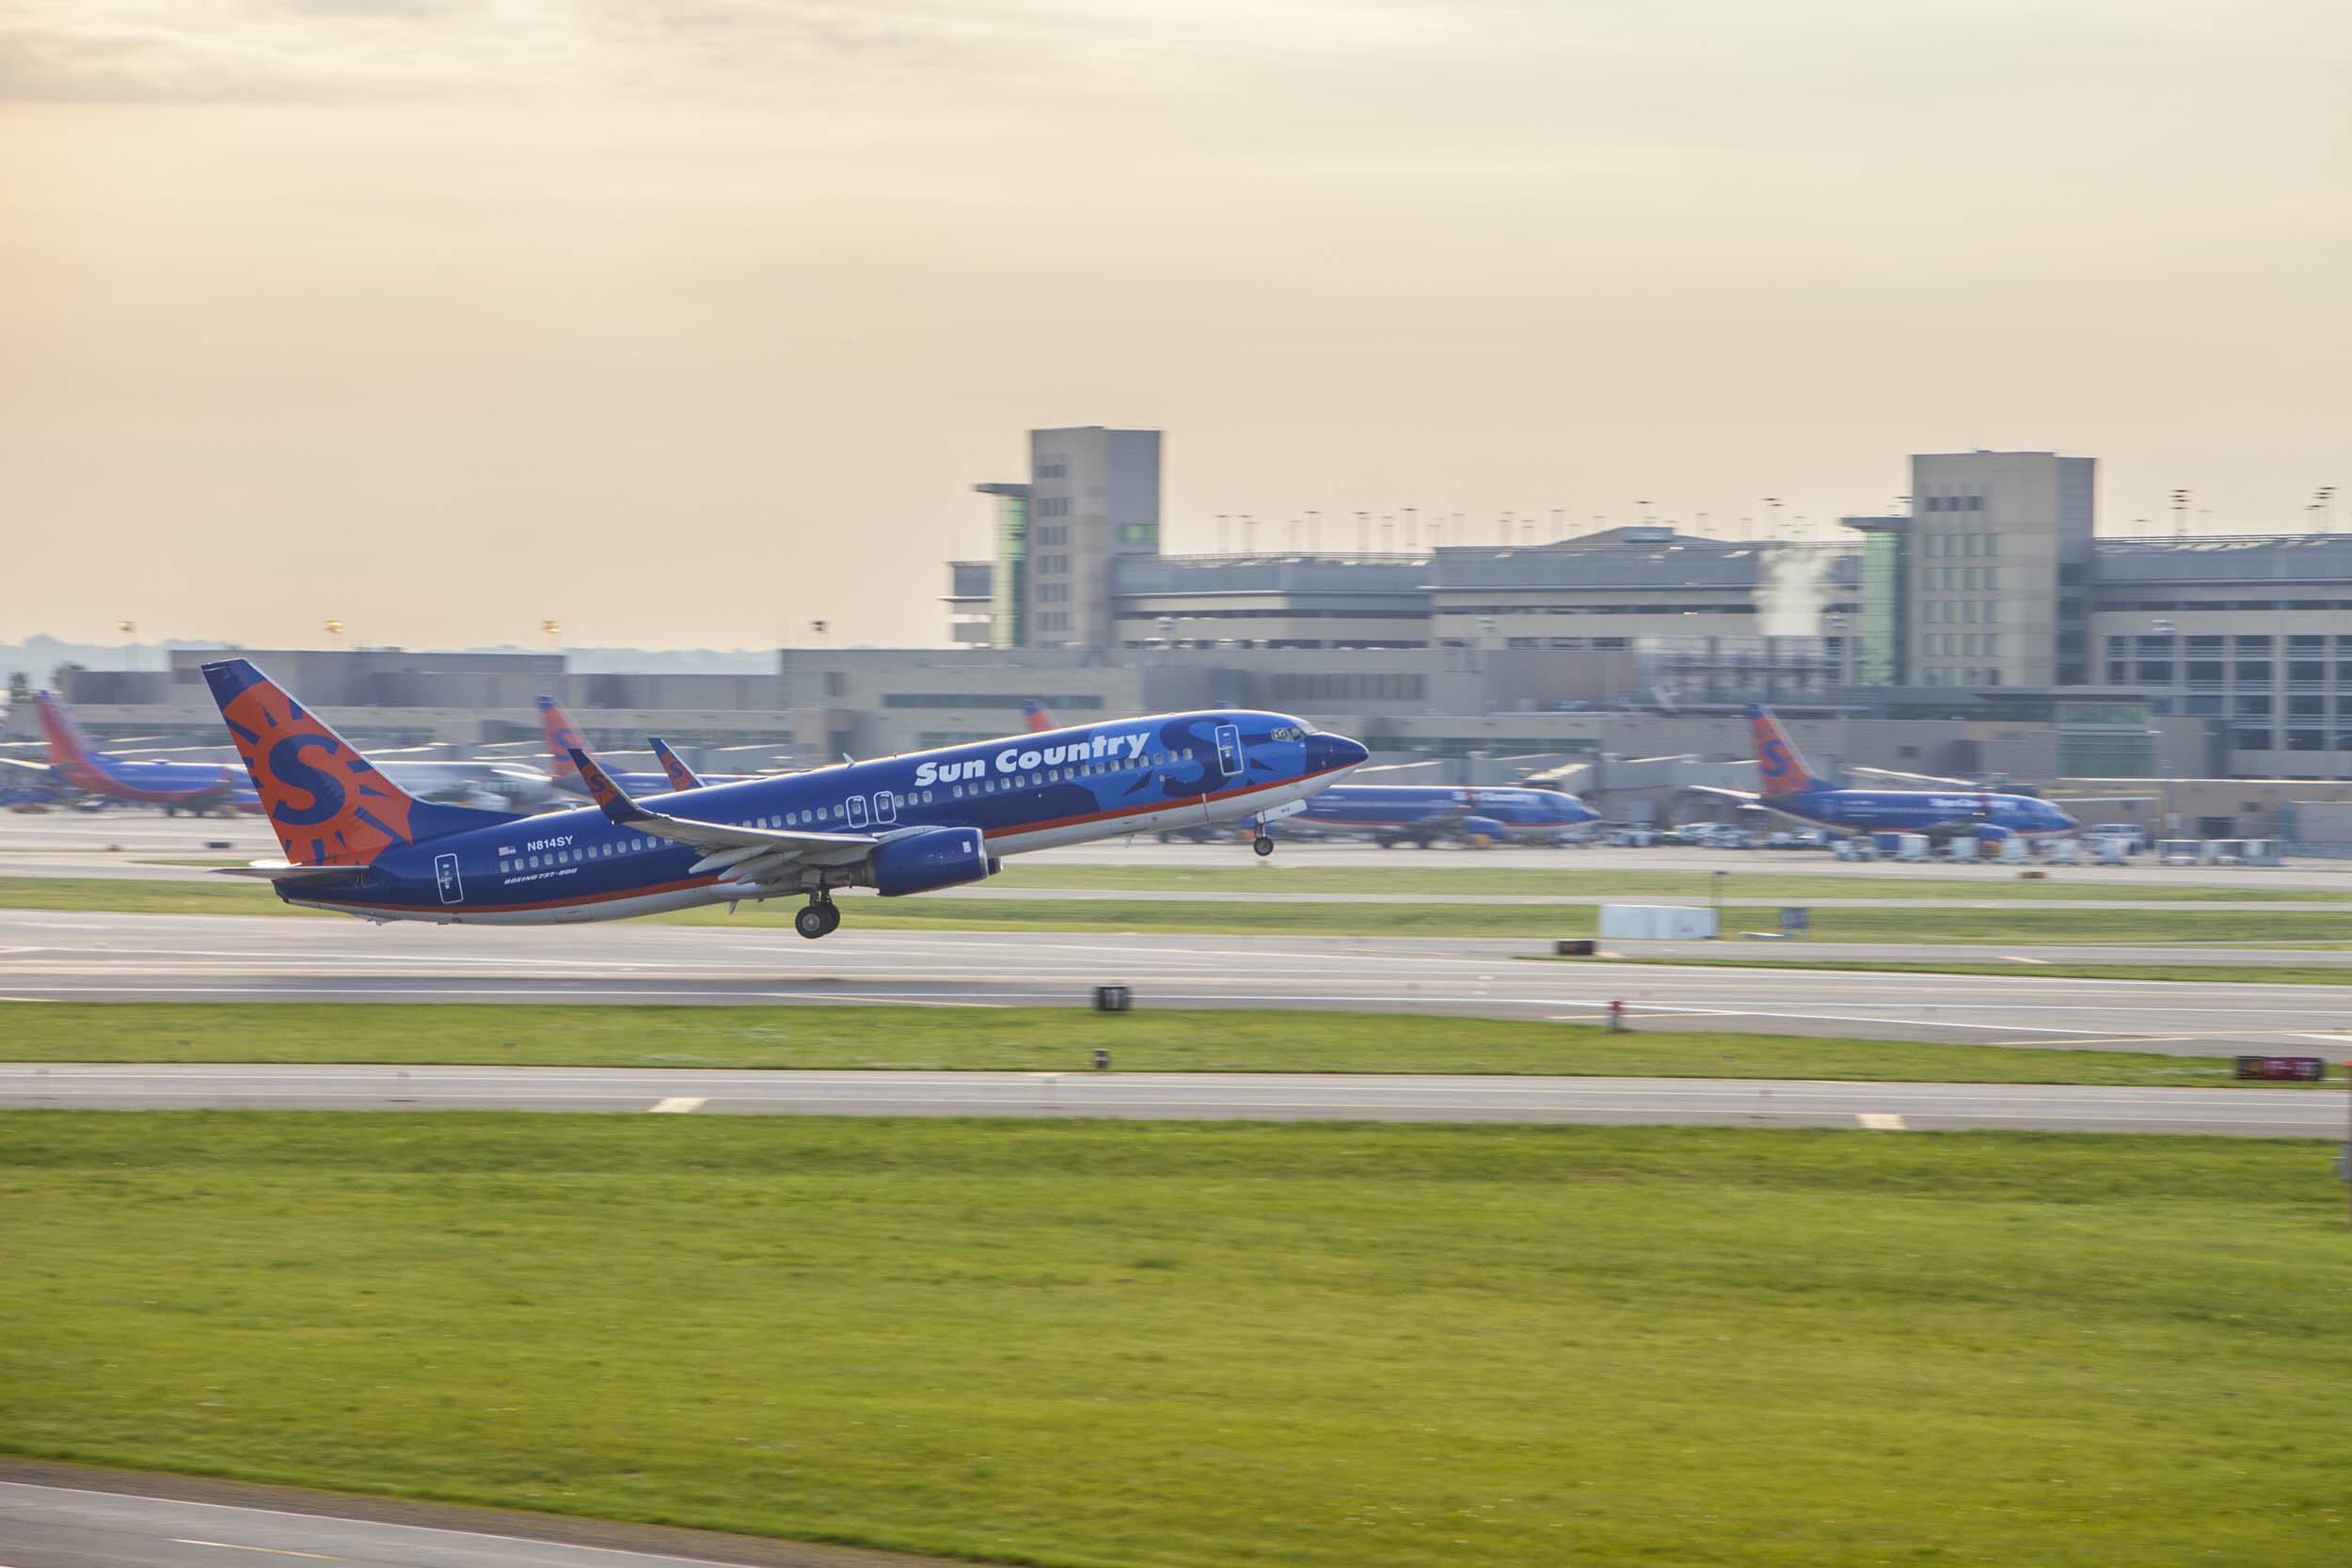 Sun Country Airlines, World Airline News